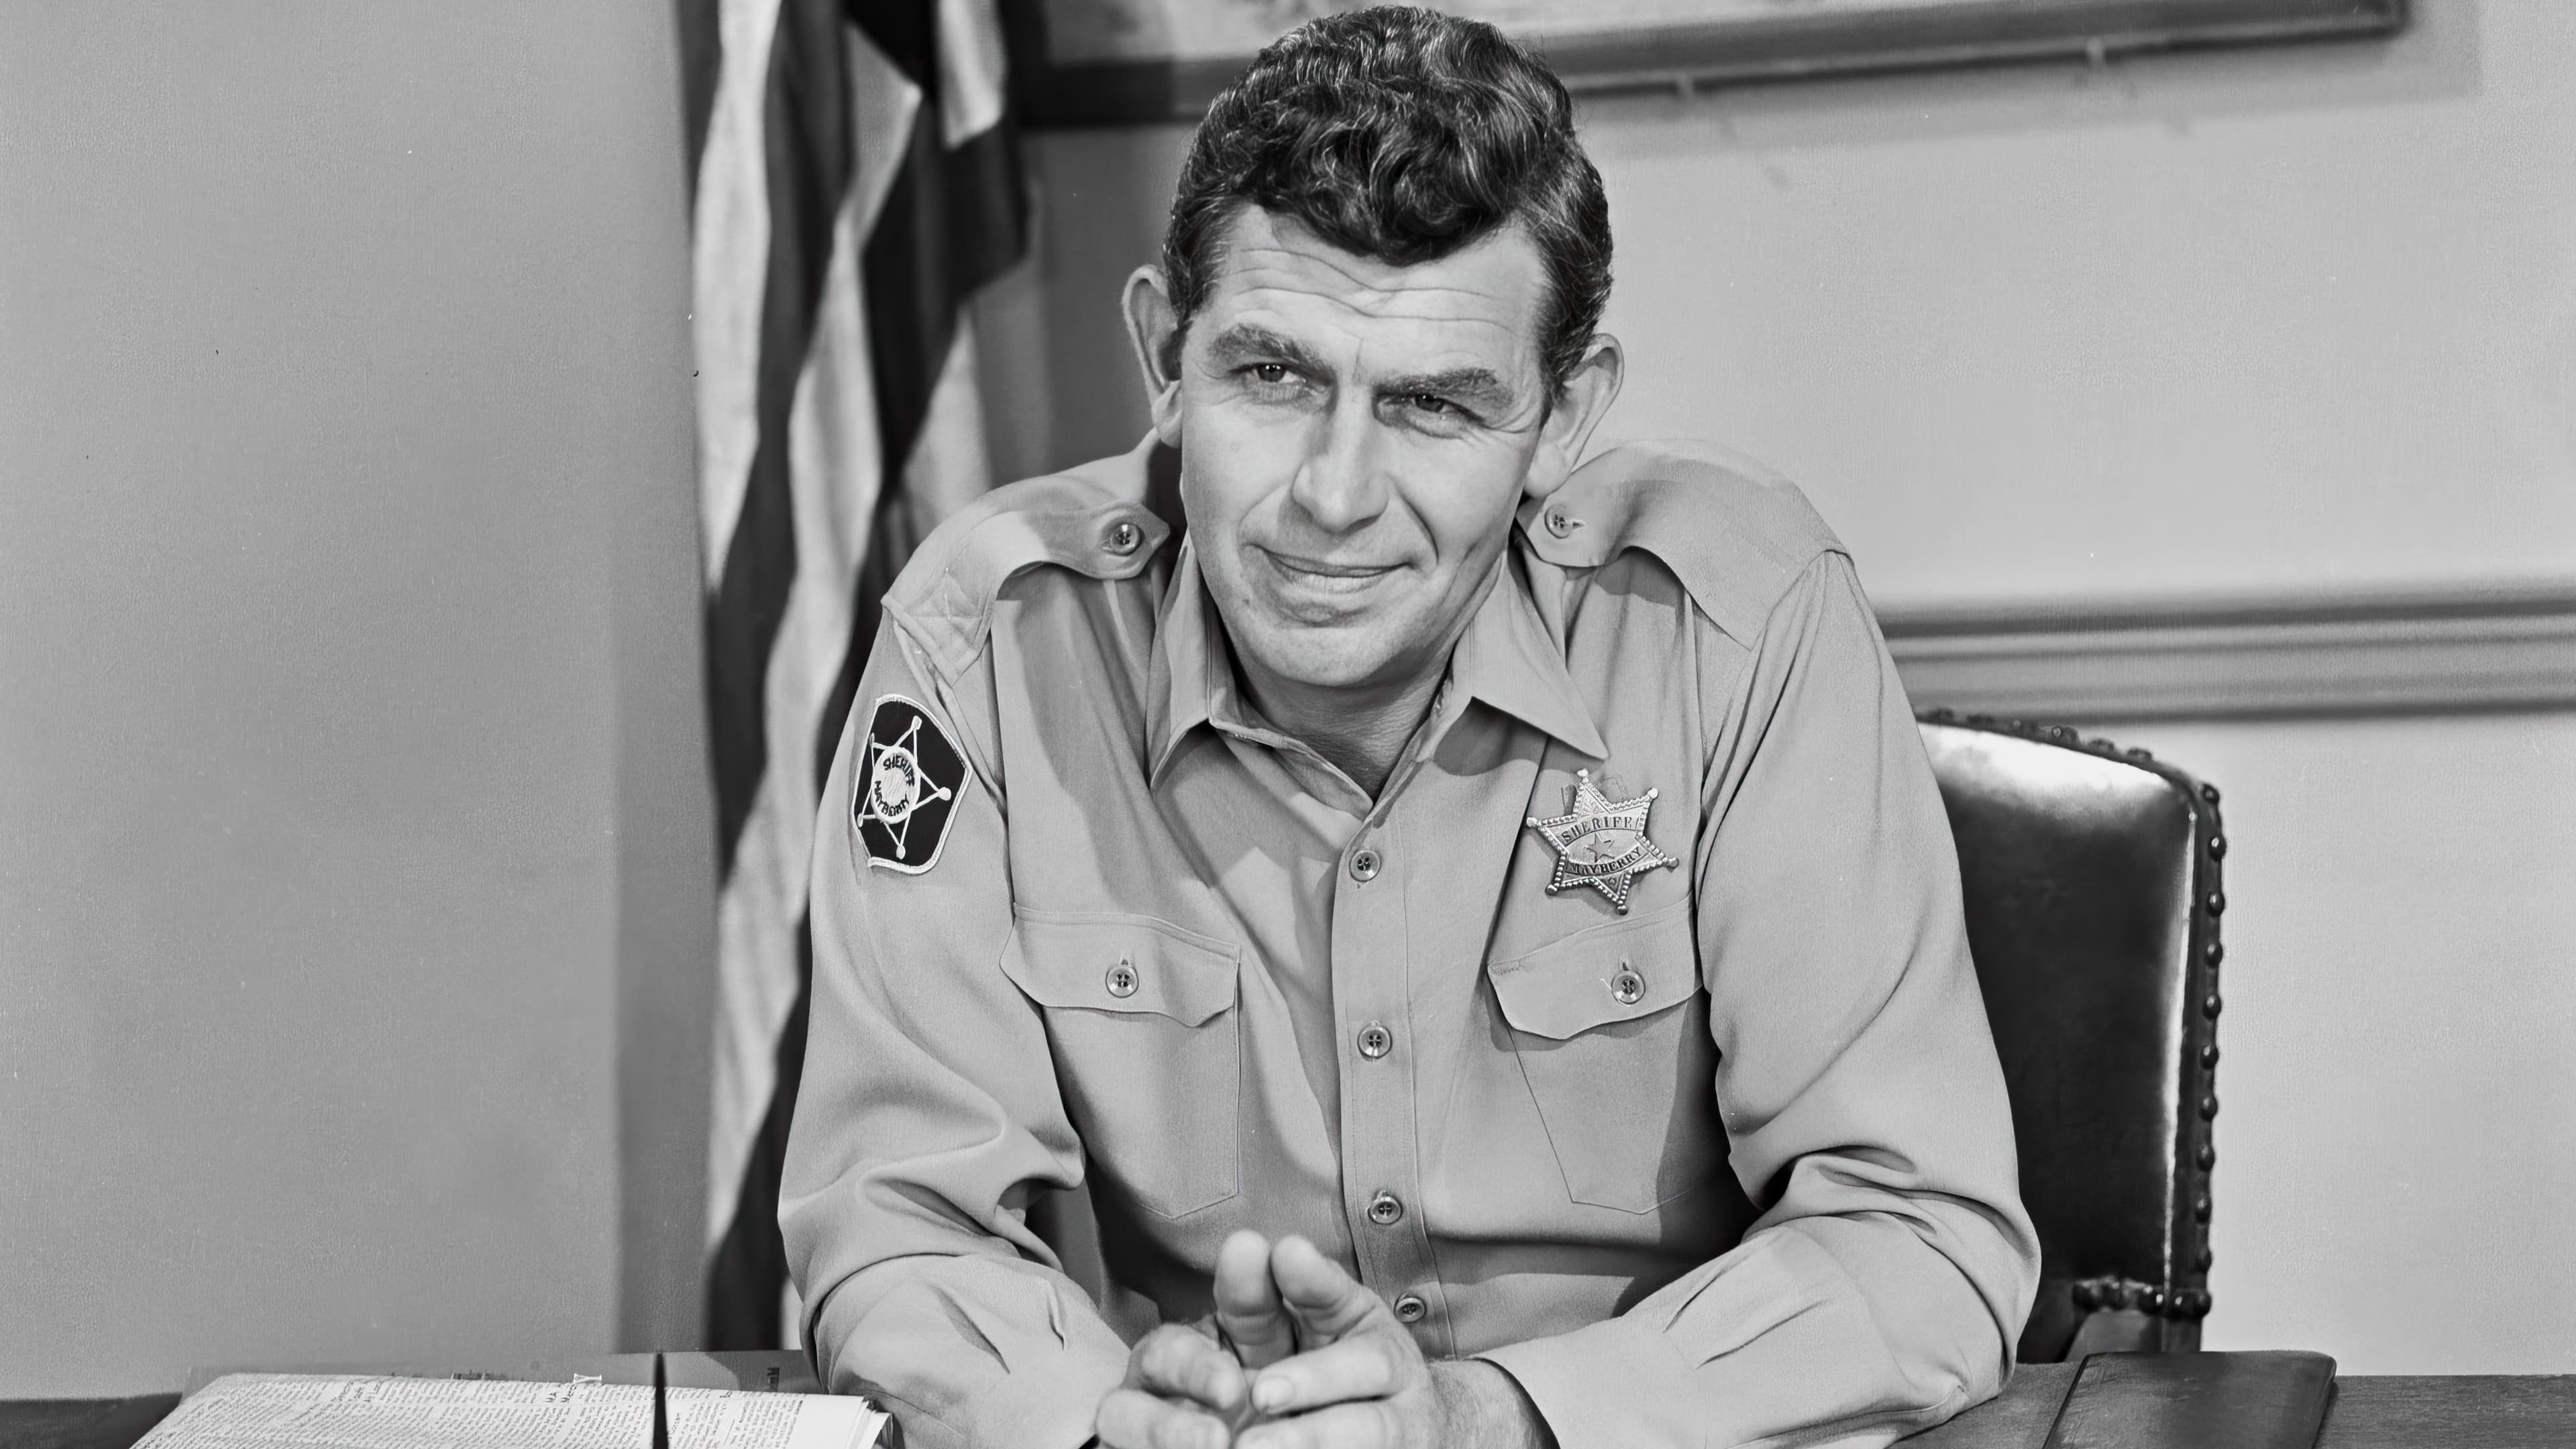 The Andy Griffith Show - Season 5